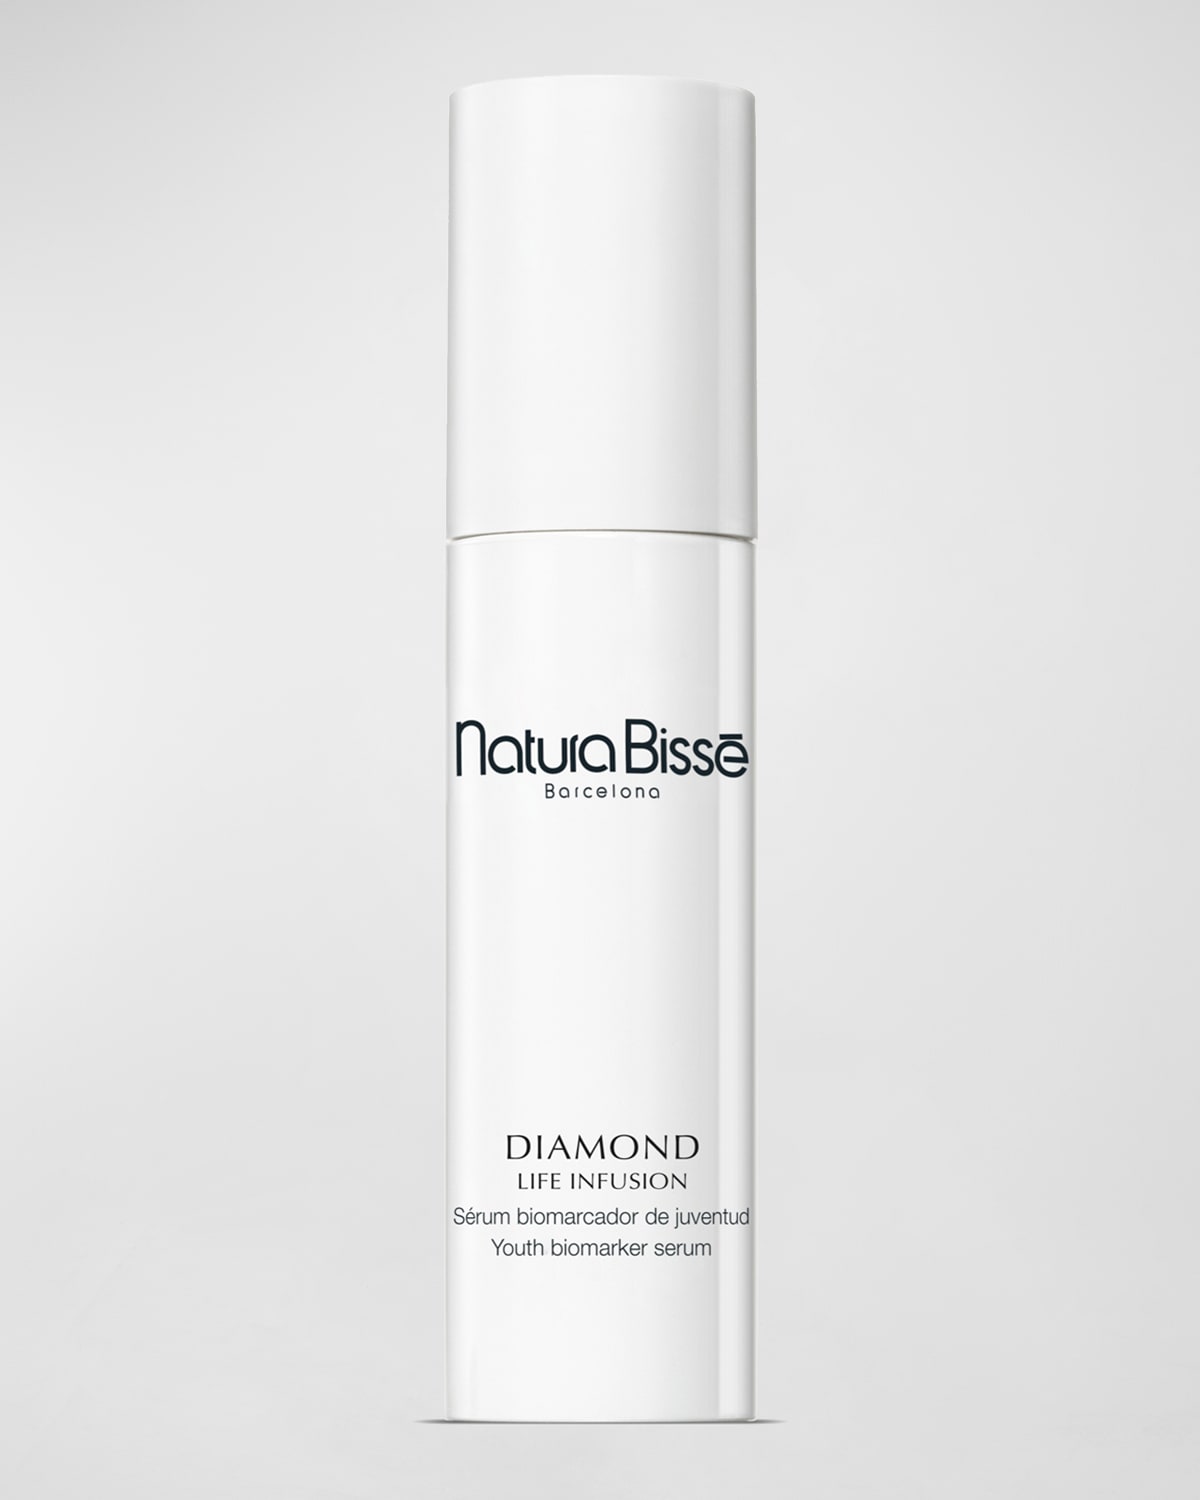 Limited Edition Value Size Diamond Life Infusion ($1,250 Value), 1.7 oz.